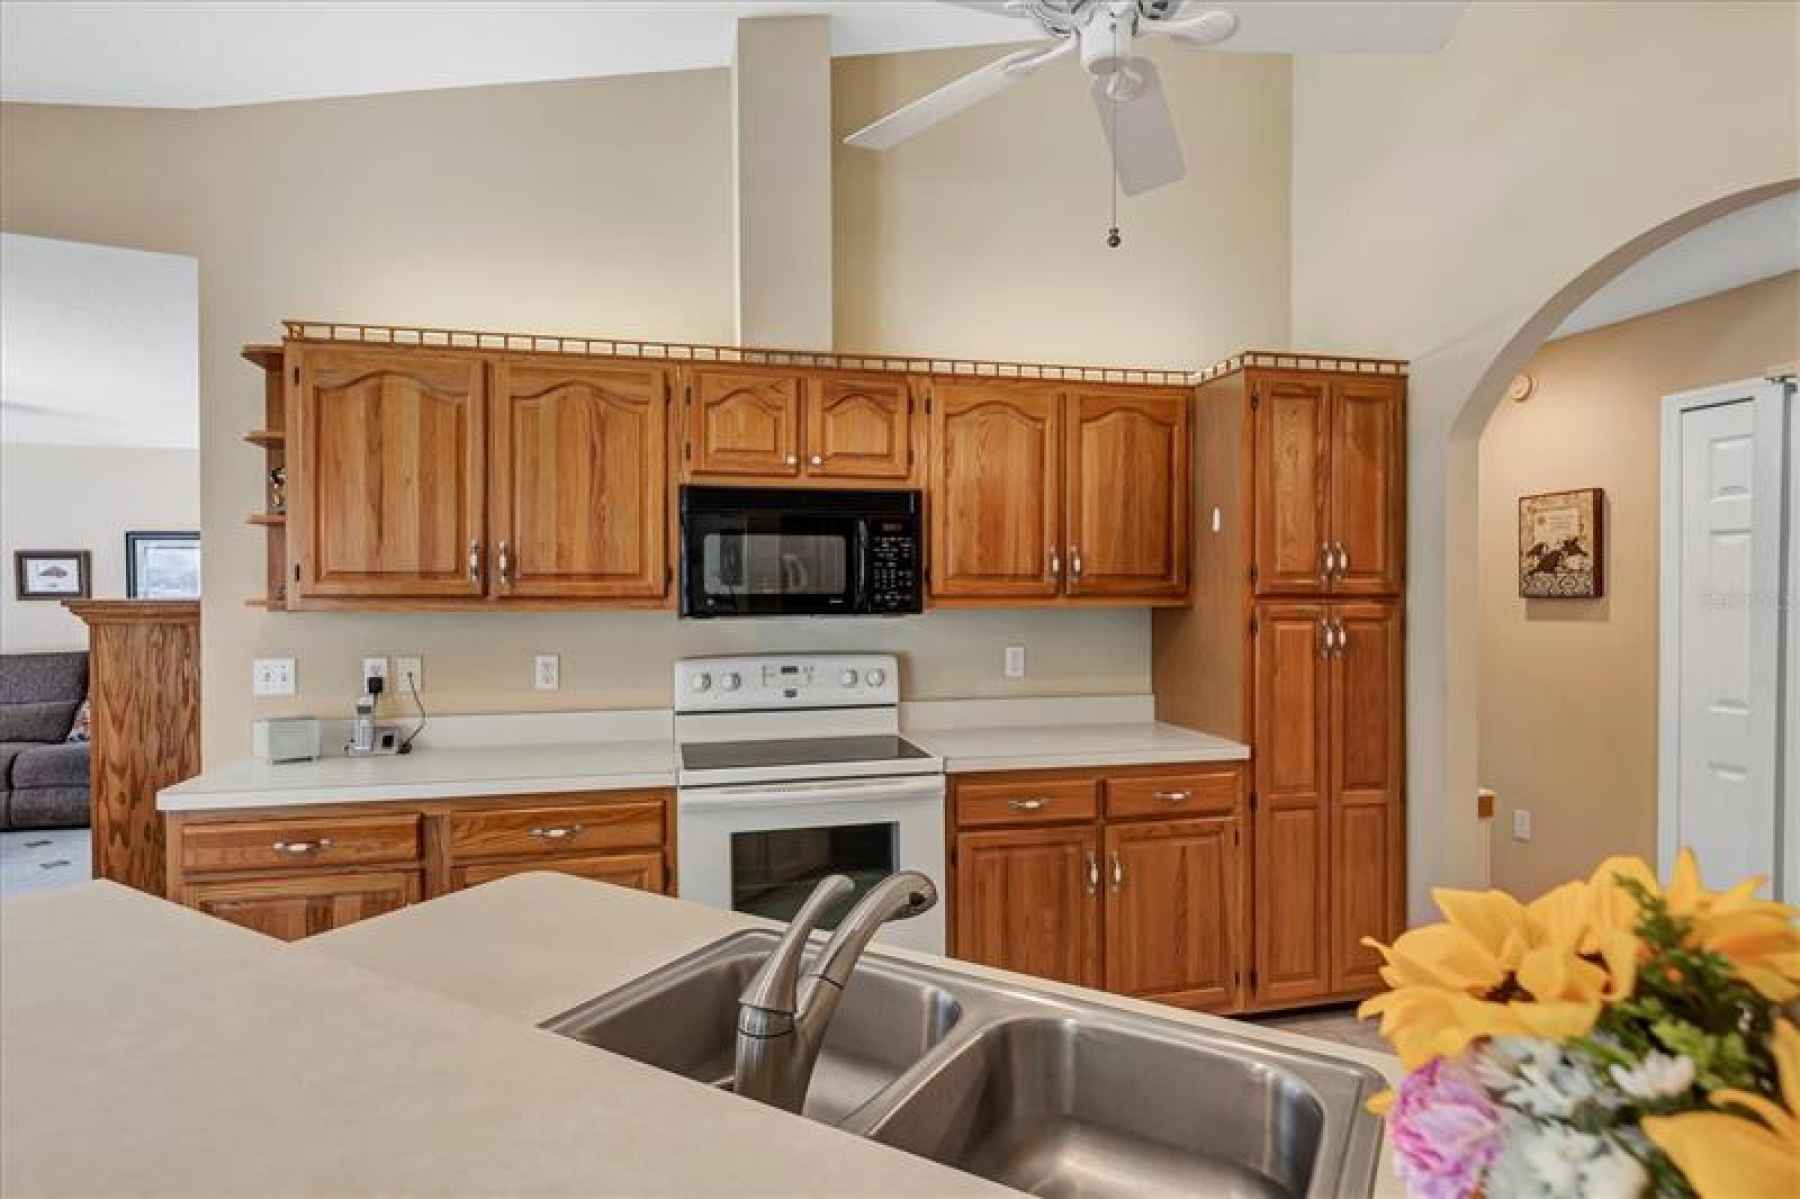 Solid surface counter tops and wood cabinets grace the kitchen